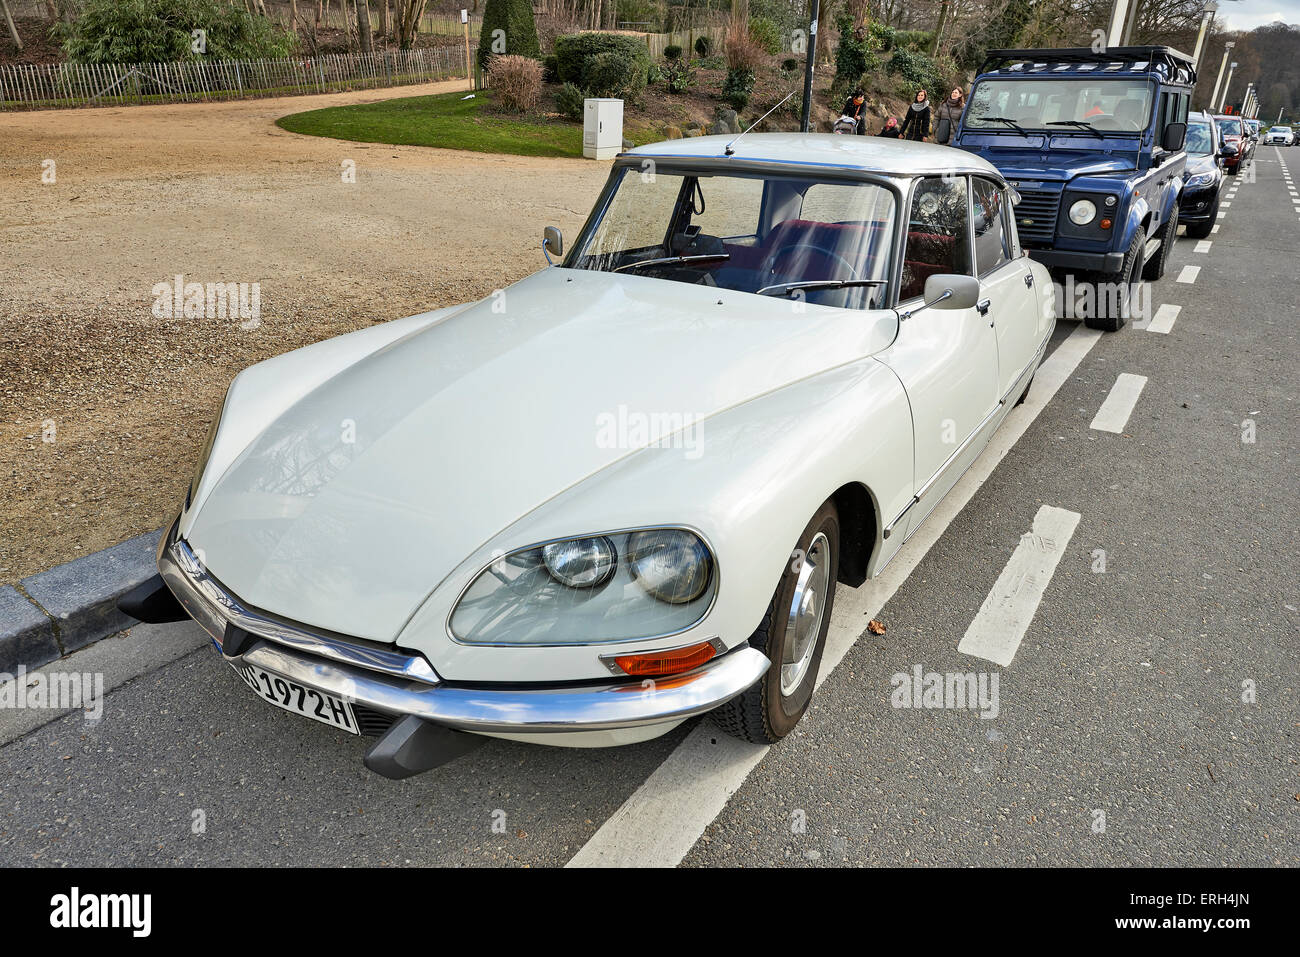 BRUSSELS, BELGIUM - FEBRUARY 16, 2014: A white, 1968 Citroën DS, the classic, elegant, streamlined French automobile, standing i Stock Photo